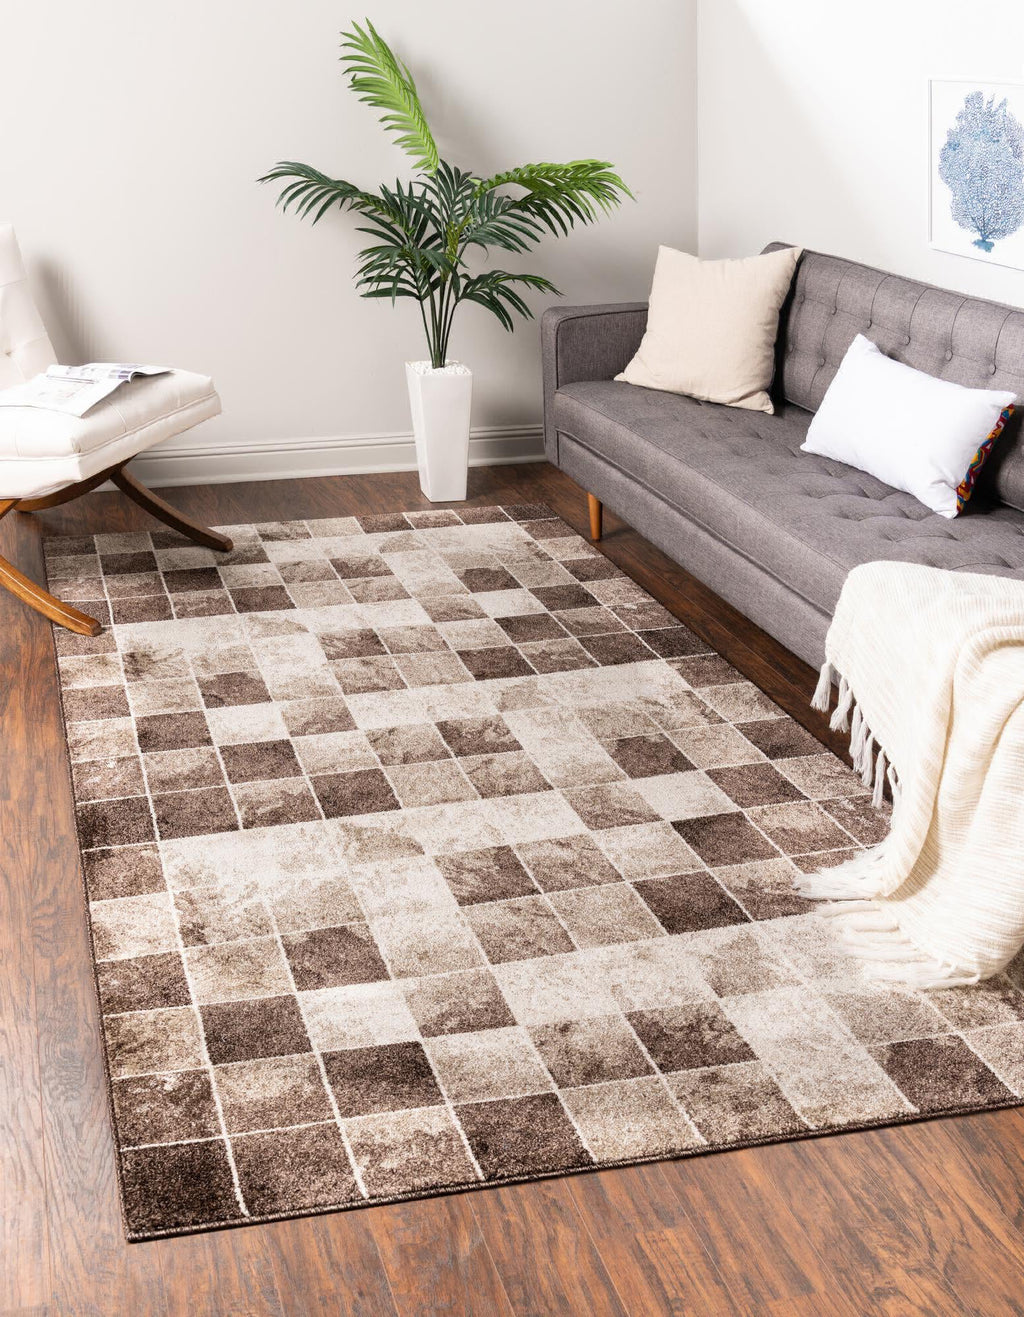 Unique Loom Wildlife T-8962a Light Brown Area Rug Rectangle Lifestyle Image Feature